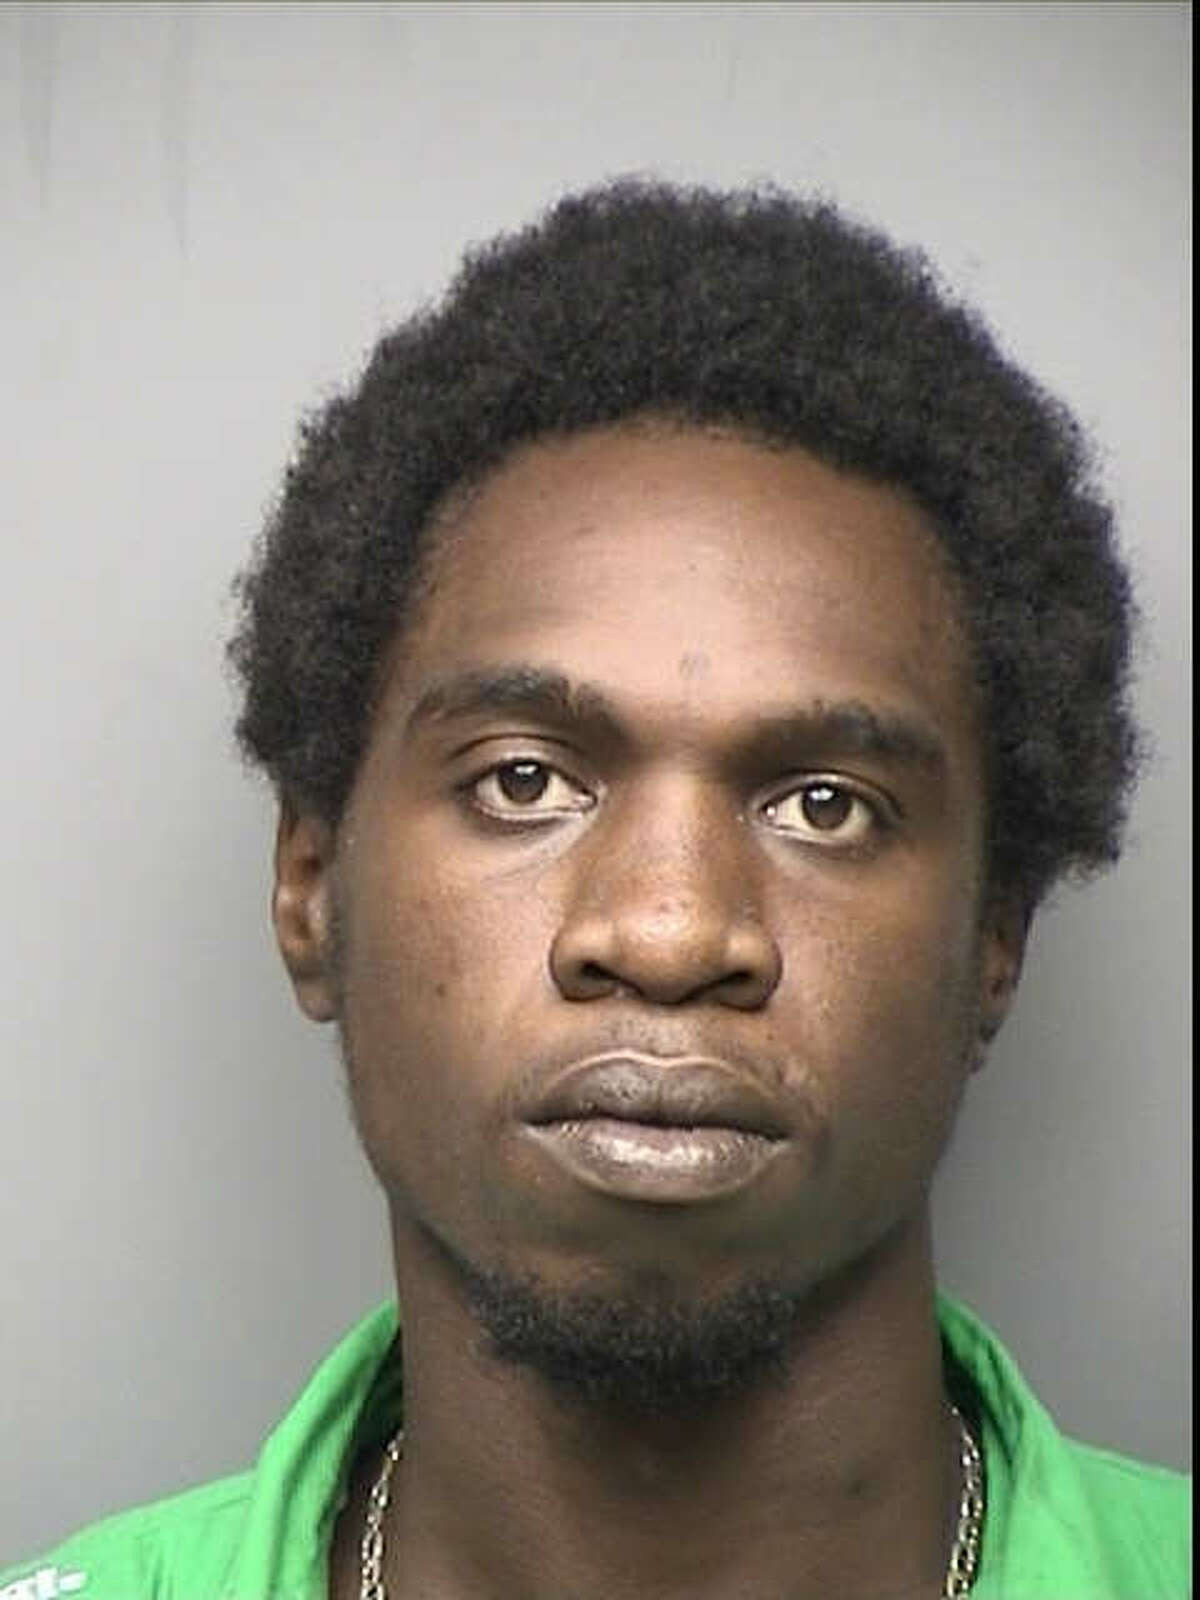 Freddy Perryman, 25, is accused of sexually assaulting and beating a 14-year-old girl who had run away from home.